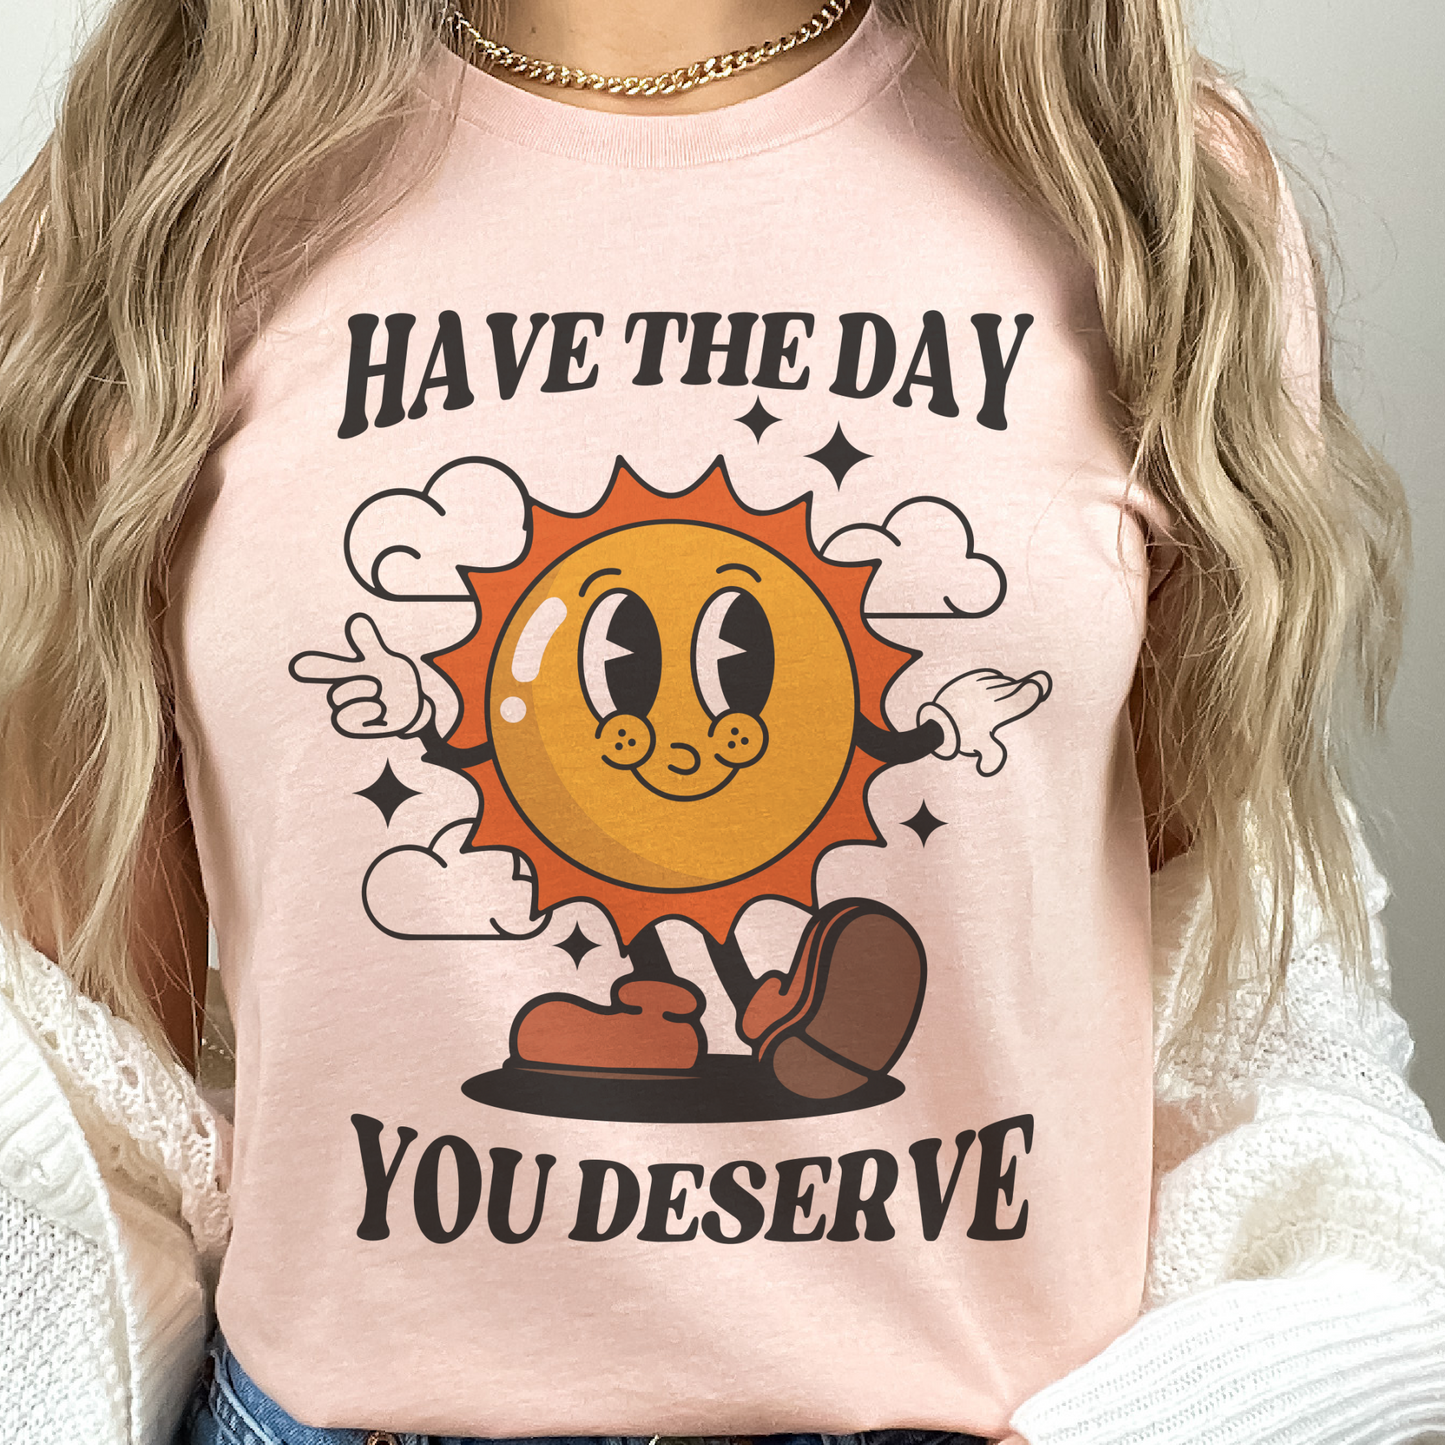 Have the Day you Deserve T-Shirt Funny Relatable Tshirt Sarcastic Fun Tee Soft Print Shirt Sublimation Print T-Shirt Funny Sarcastic Tshirt Day you Deserve Tee Casual Comfortable